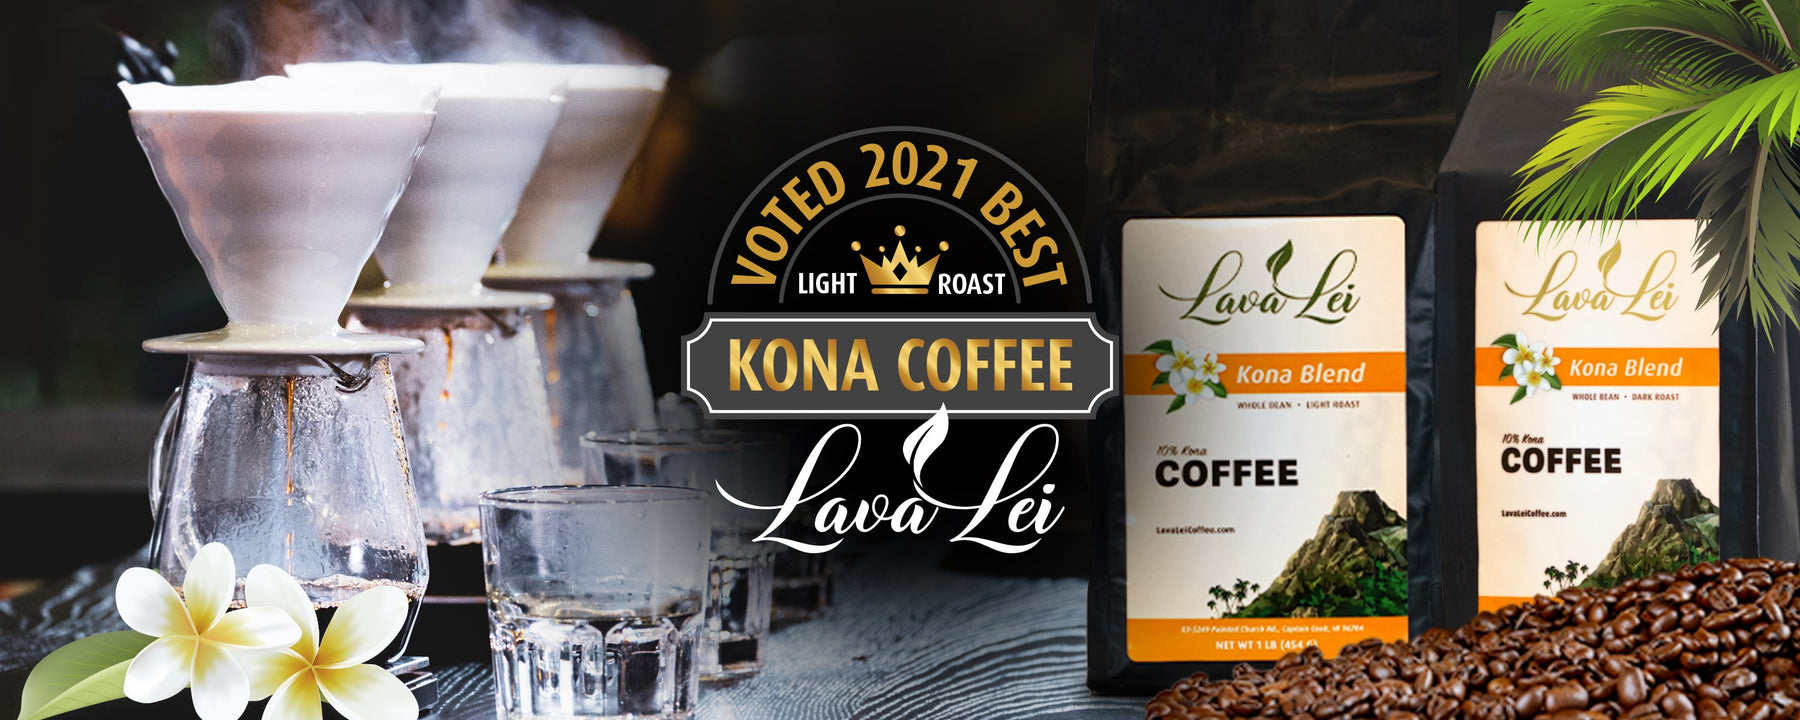 Lava Lei coffee packaging with manual drip coffee in the background. Emblem of Voted Kona's 2021 Best Light Roast Kona Coffee.